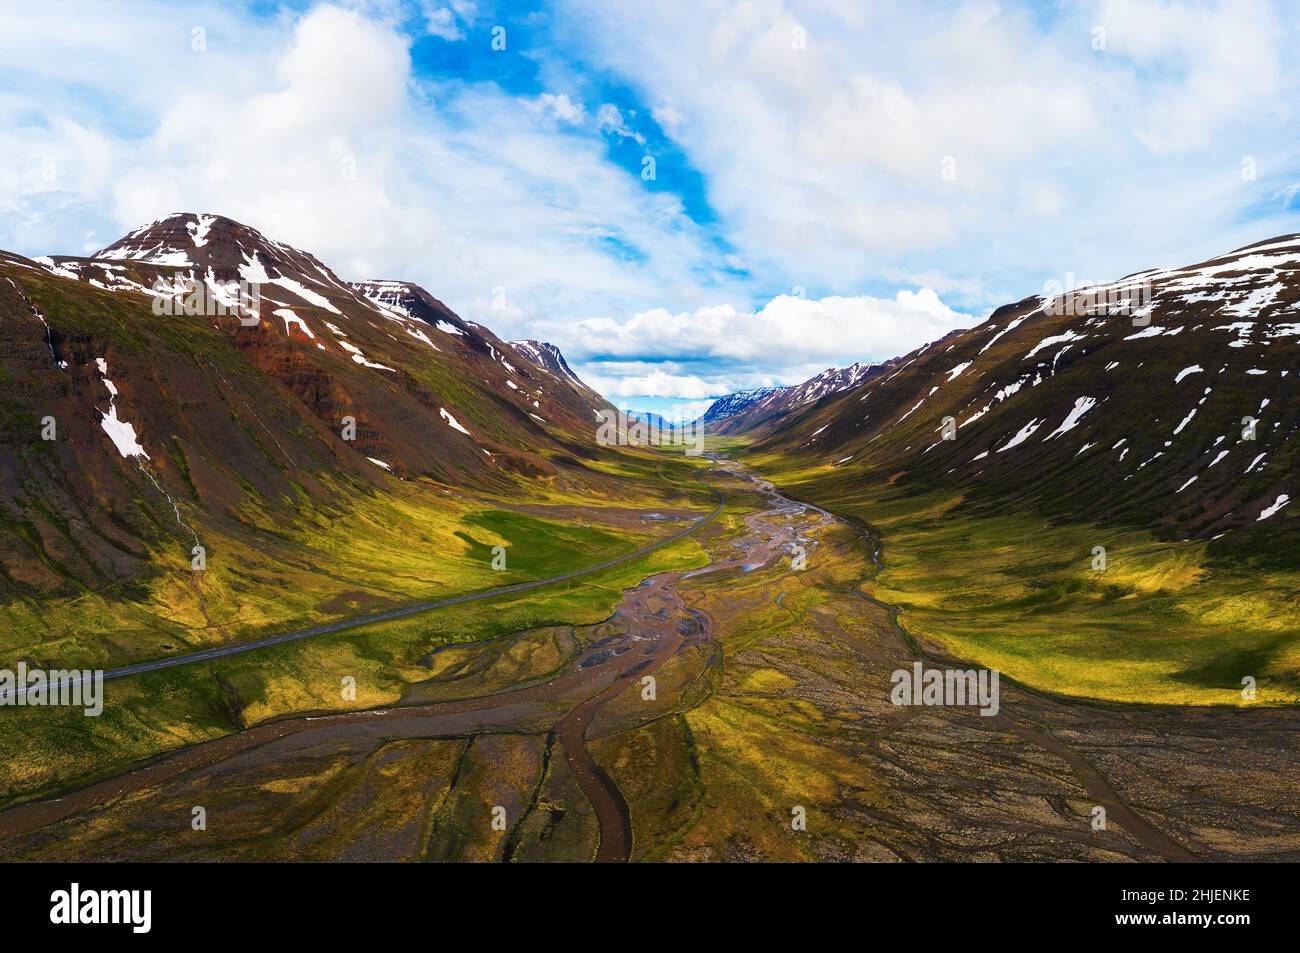 Aerial view of a road going through icelandic landscape Stock Photo